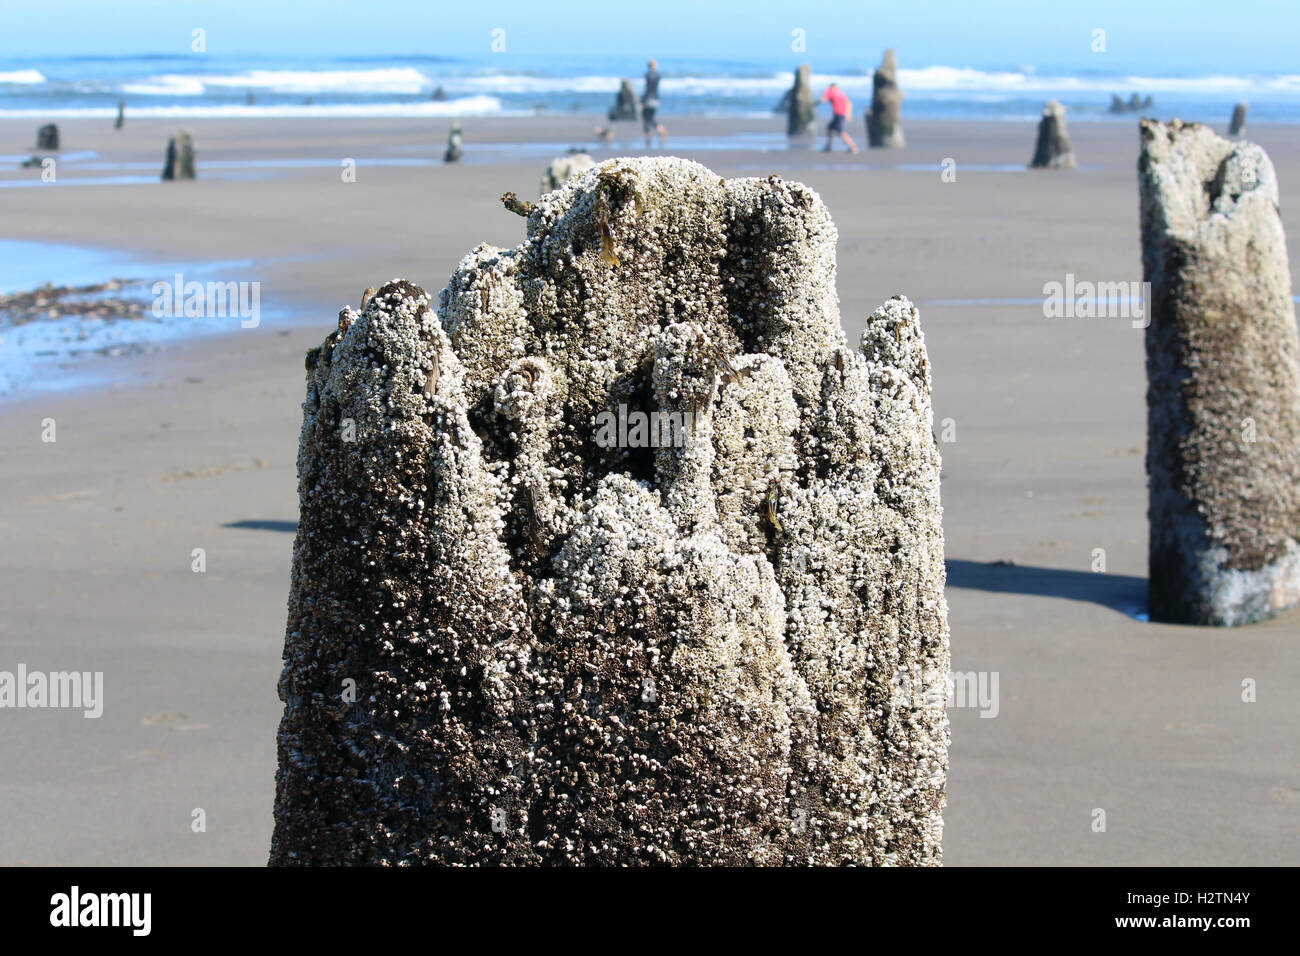 Barnacle covered stump from ancient forest lost in tsunami, Oregon coast, beach walkers, science, travel, adventure, serene, sea Stock Photo